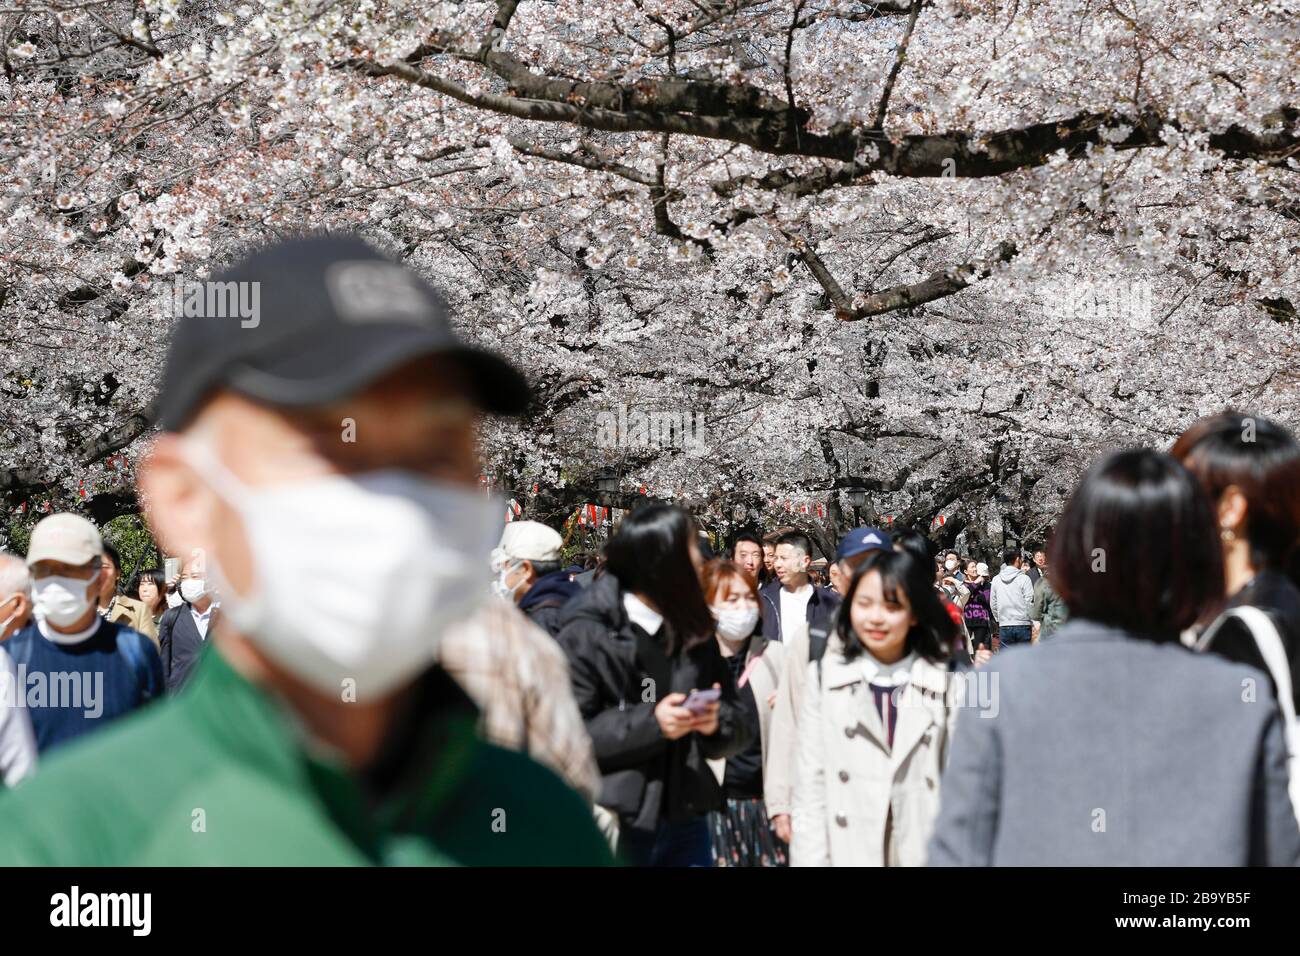 Tokyo, Japan. 25th Mar, 2020. Visitors wearing face masks gather to see the cherry blossoms in full bloom at Ueno Park. Tokyo Governor Yuriko Koike asked residents, on Wednesday, to refrain from all non-essential outings this weekend, amid a rise of 41 new cases of coronavirus infections reported in Tokyo on Wednesday alone. During a news conference, Koike warned to lock down the city if the coronavirus infection cases continue rising. Credit: Rodrigo Reyes Marin/ZUMA Wire/Alamy Live News Stock Photo